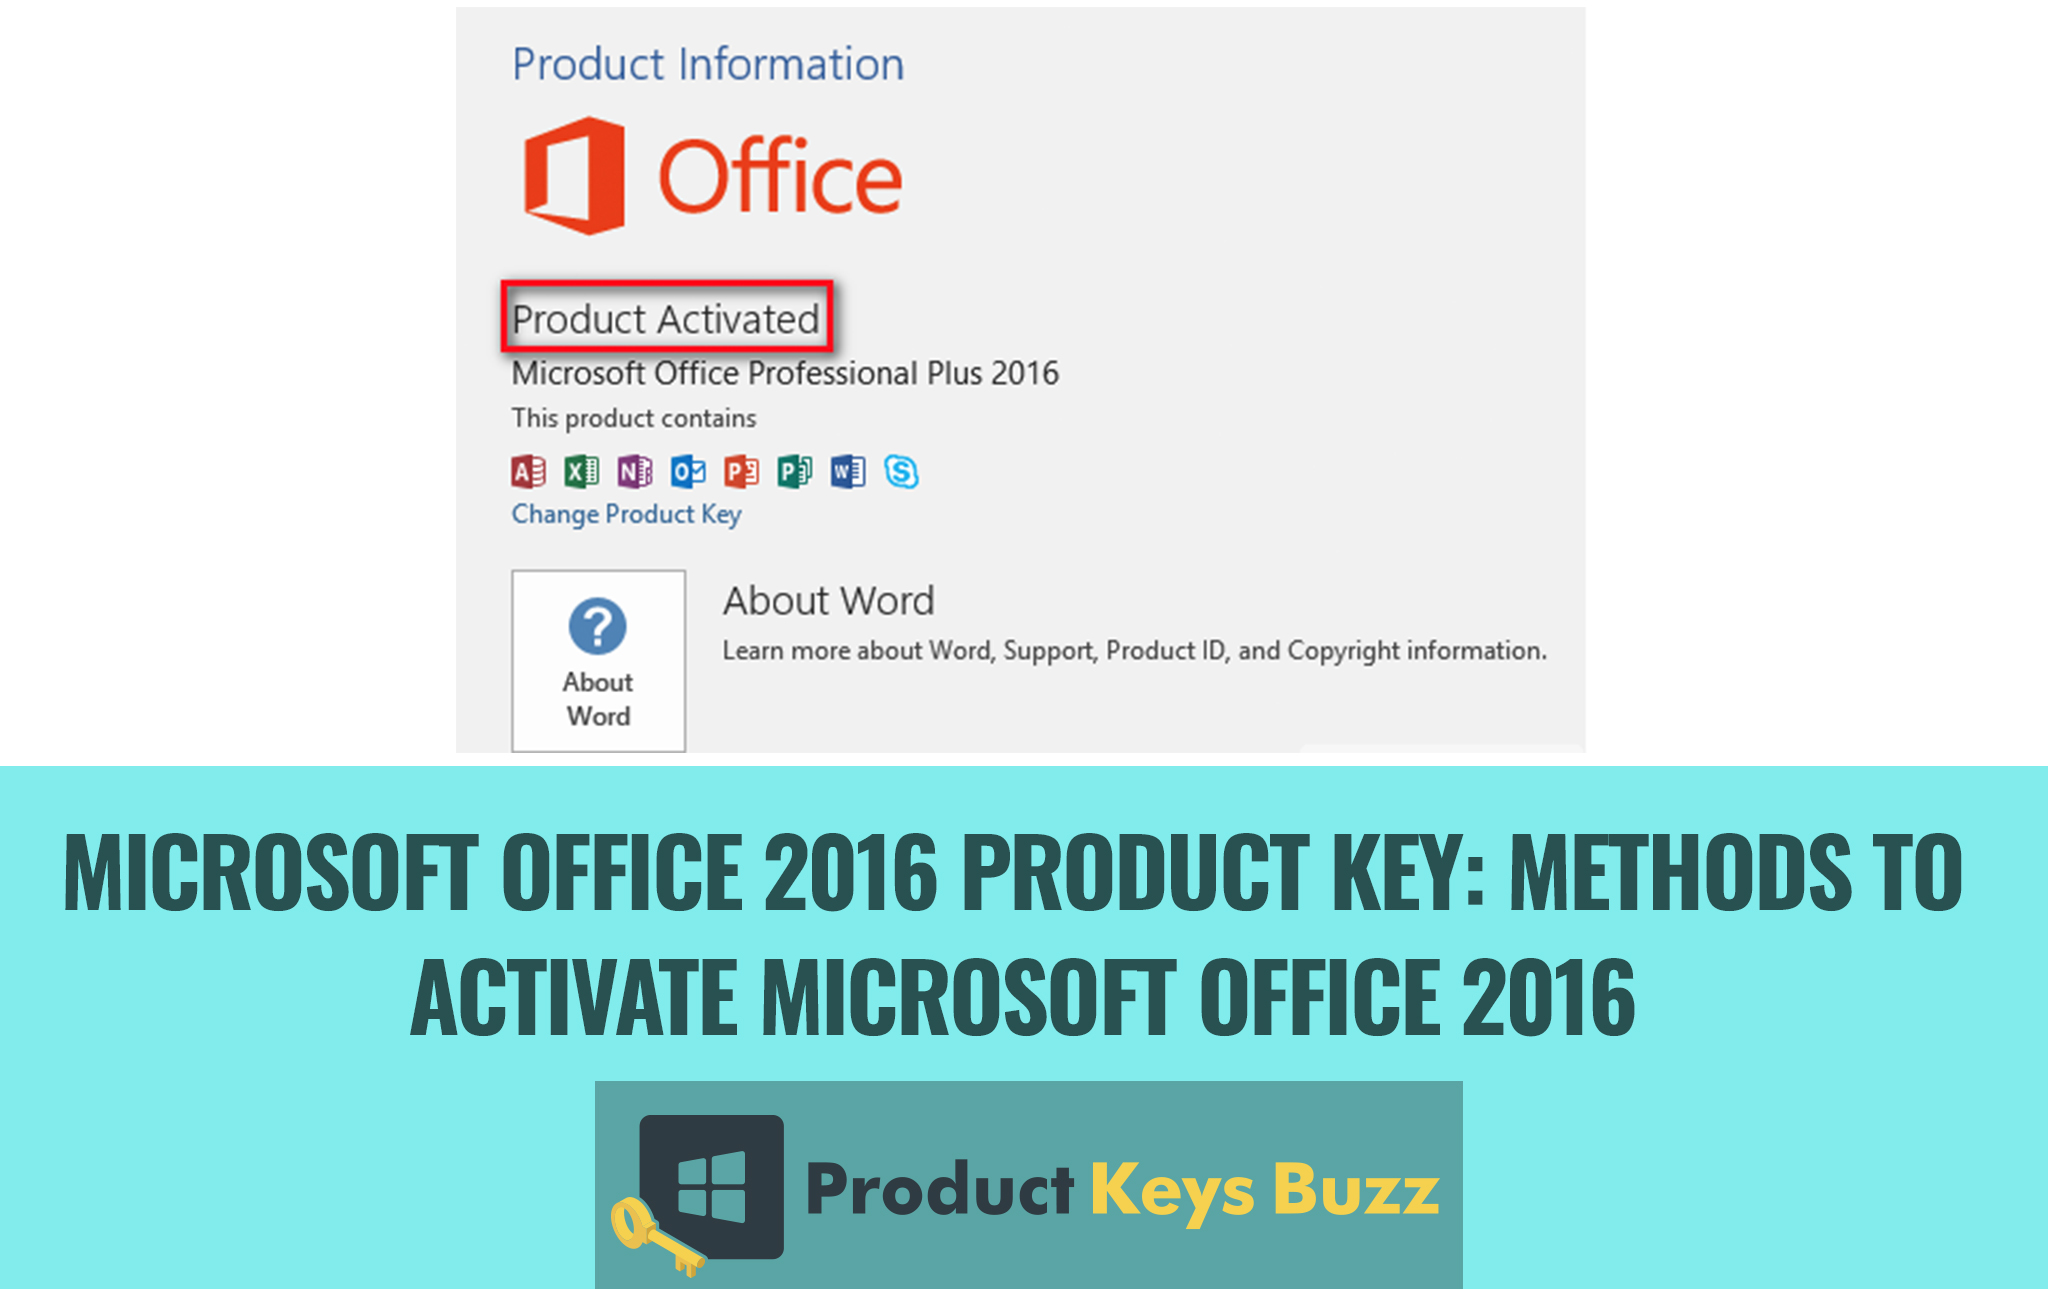 will a office 2016 for windows product key work on a mac